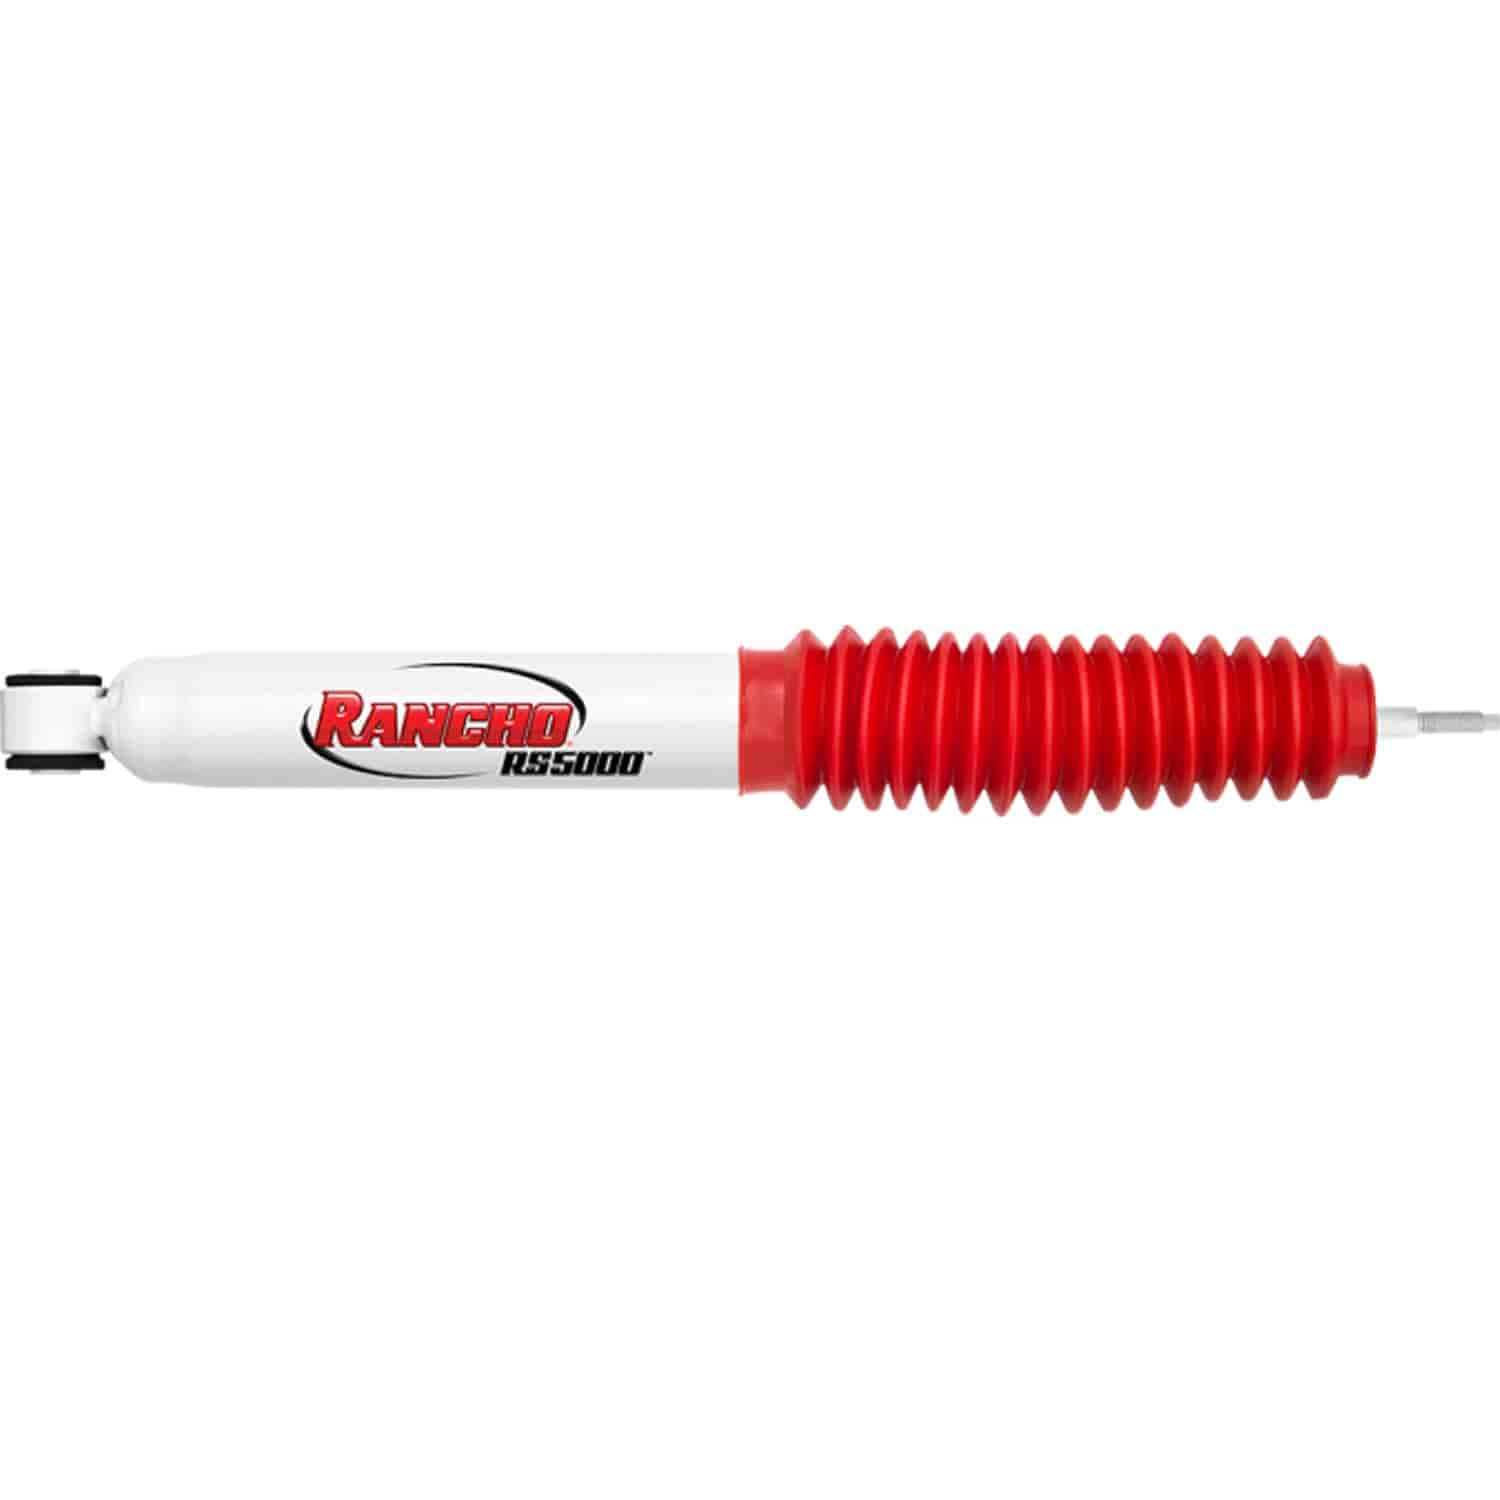 RS5000 Rear Shock Absorber Fits Toyota Tundra